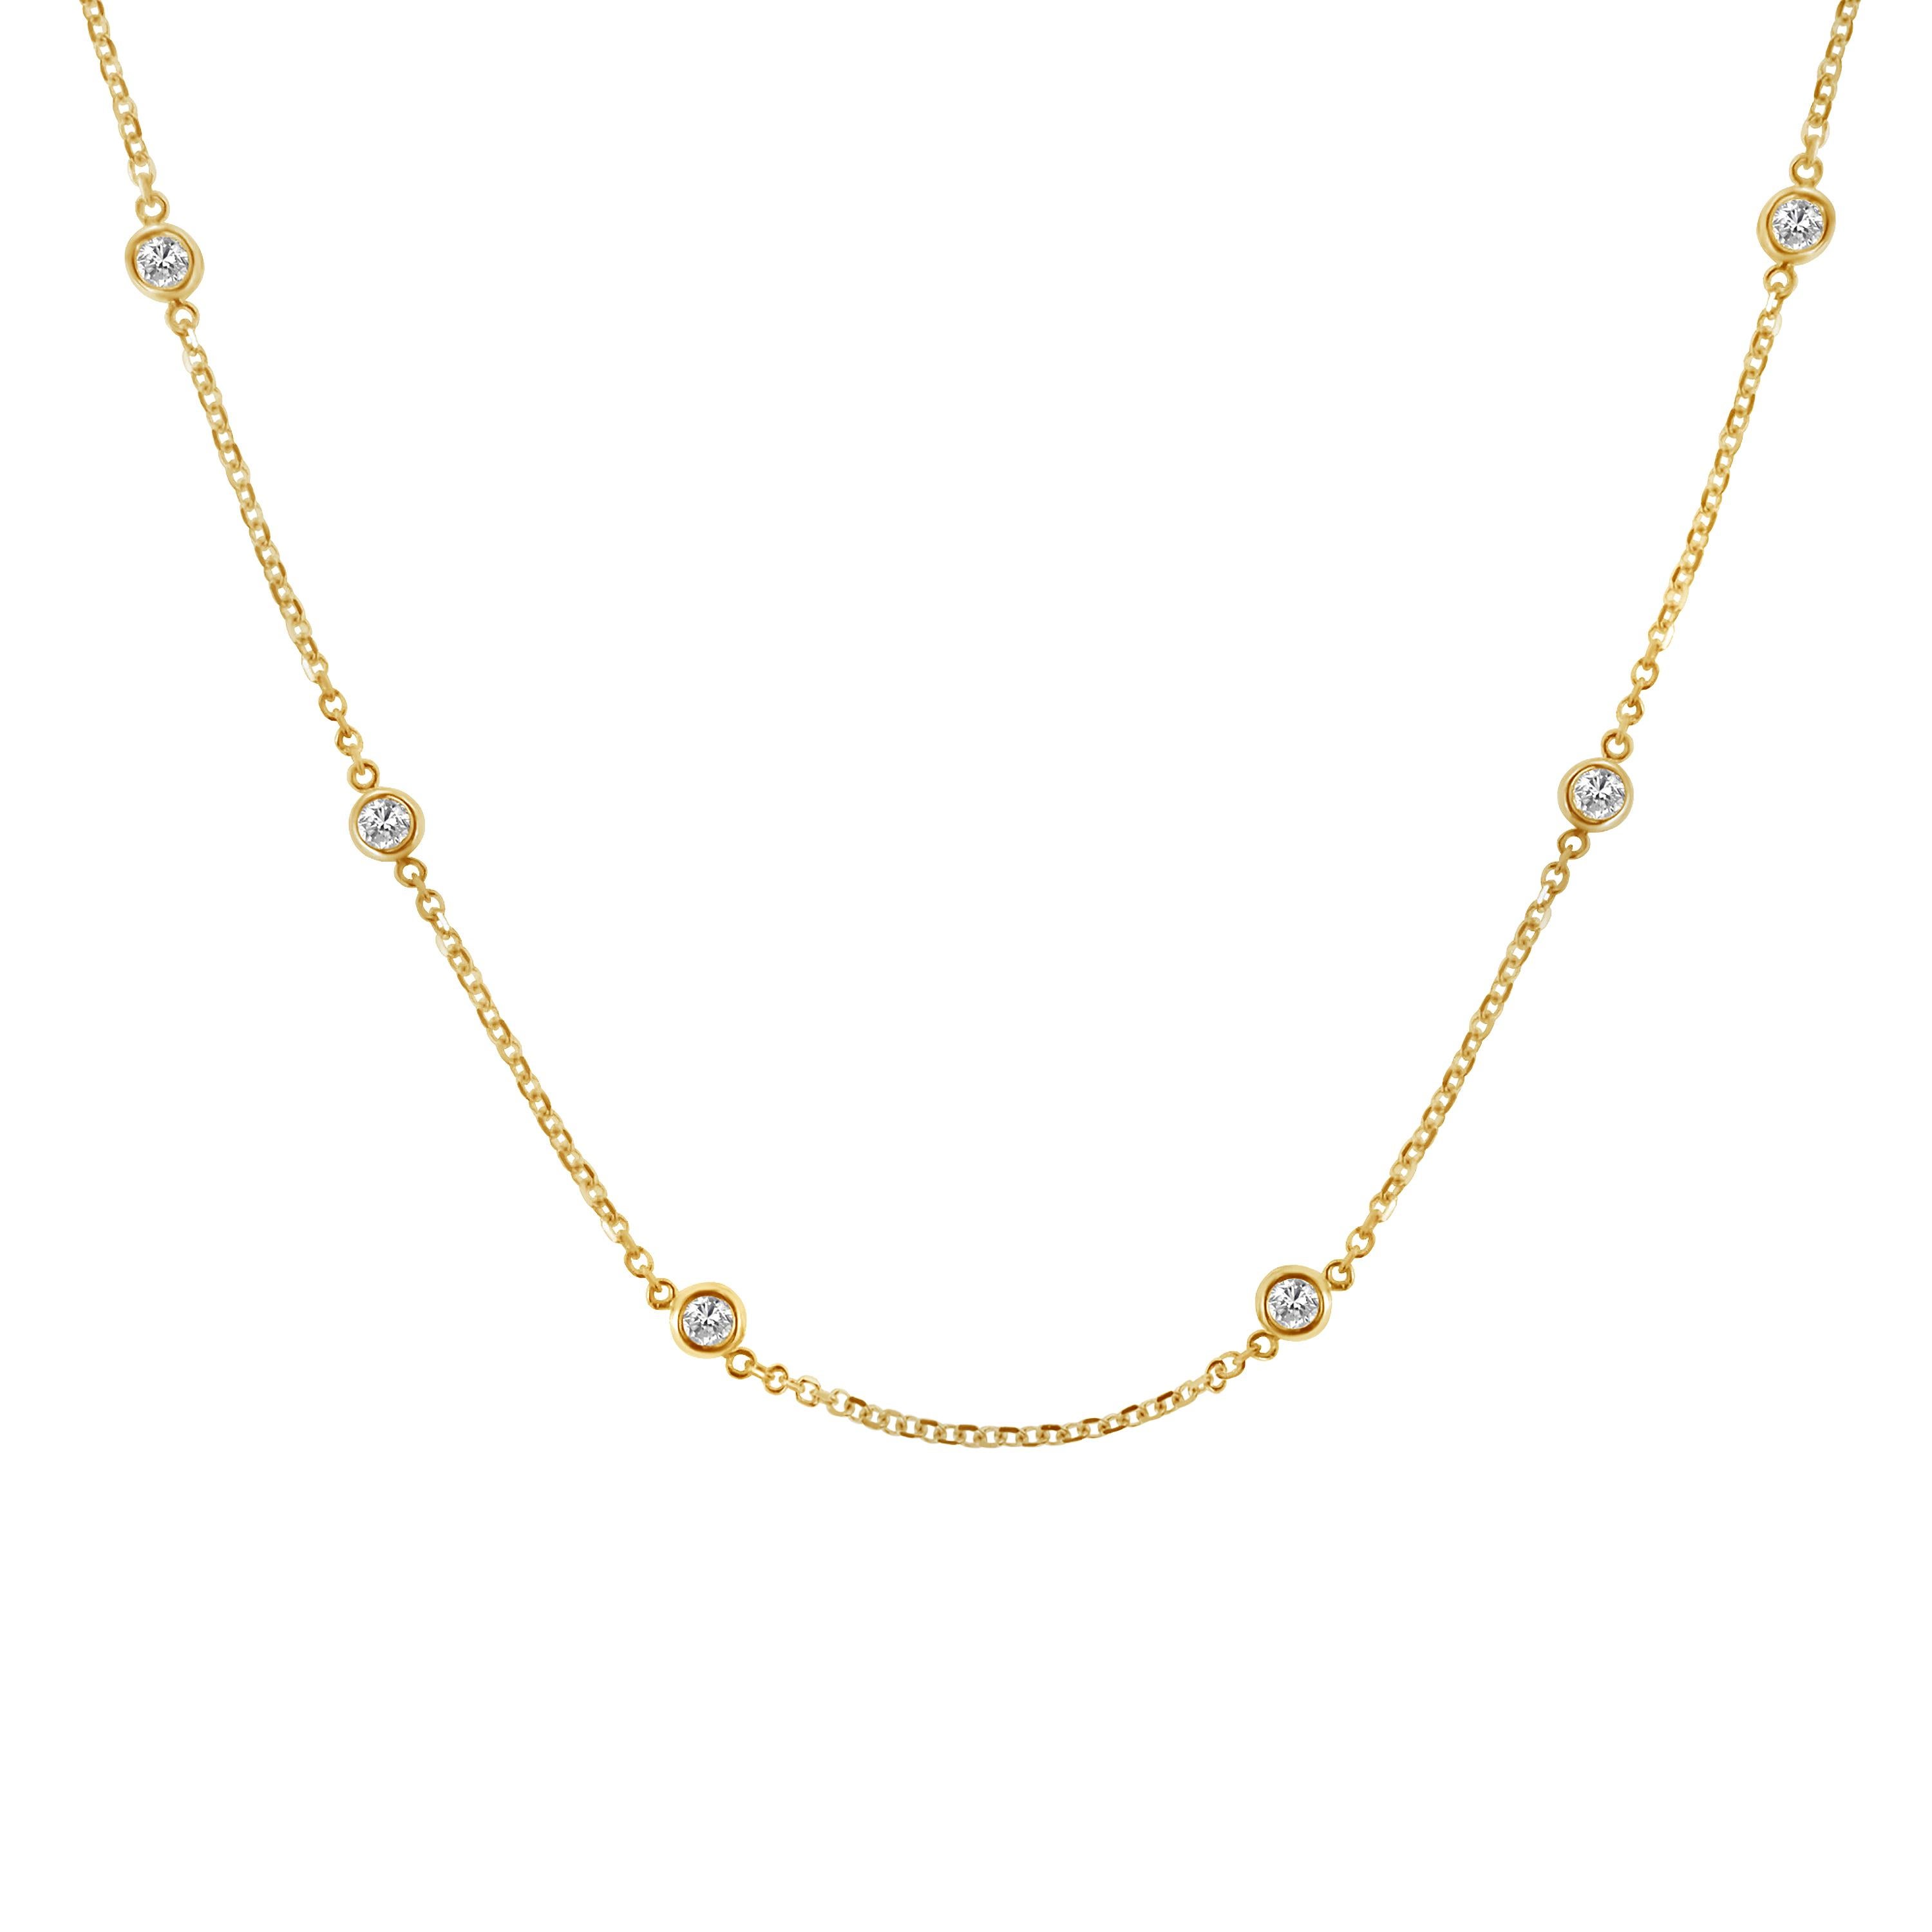 A great complement to both dressy and casual wear, this sterling silver, diamond station necklace, in your choice of white, yellow, and rose colors is extremely trendy, classy, and fashionable. Twelve brilliant cut round diamonds, weighing 1 carat